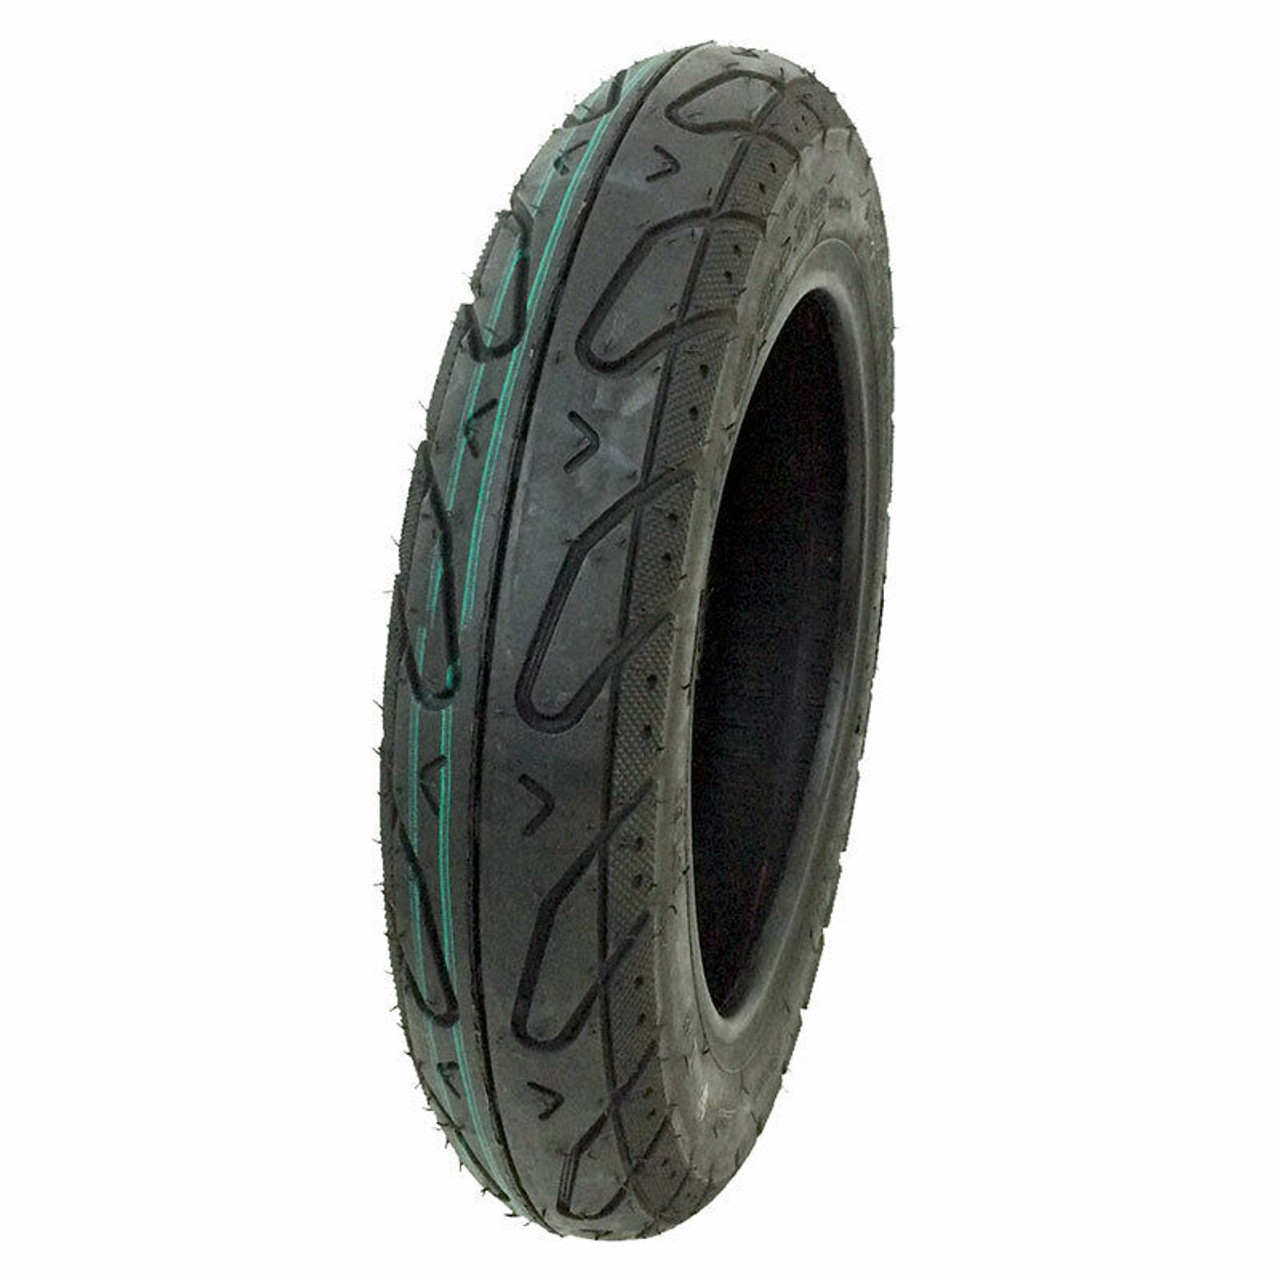 China Best 3.00-4 Scooter Tire Suppliers & Manufacturers - Factory